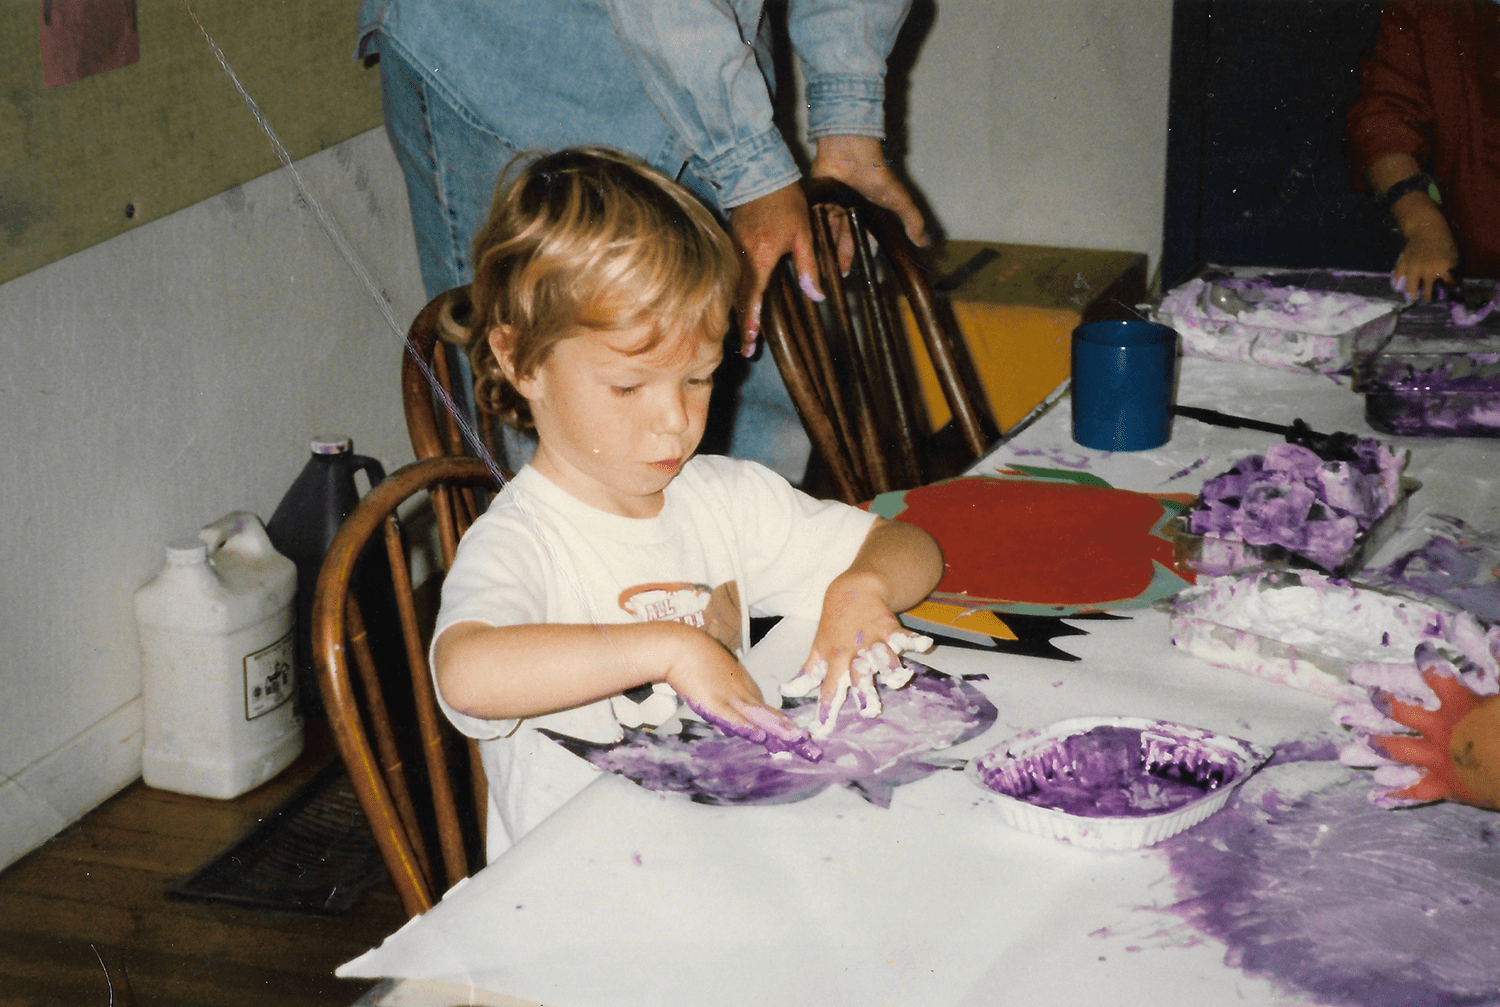 A young blond-haired boy mixing purple paint with his hands at a messy table covered in arts and craft supplies.